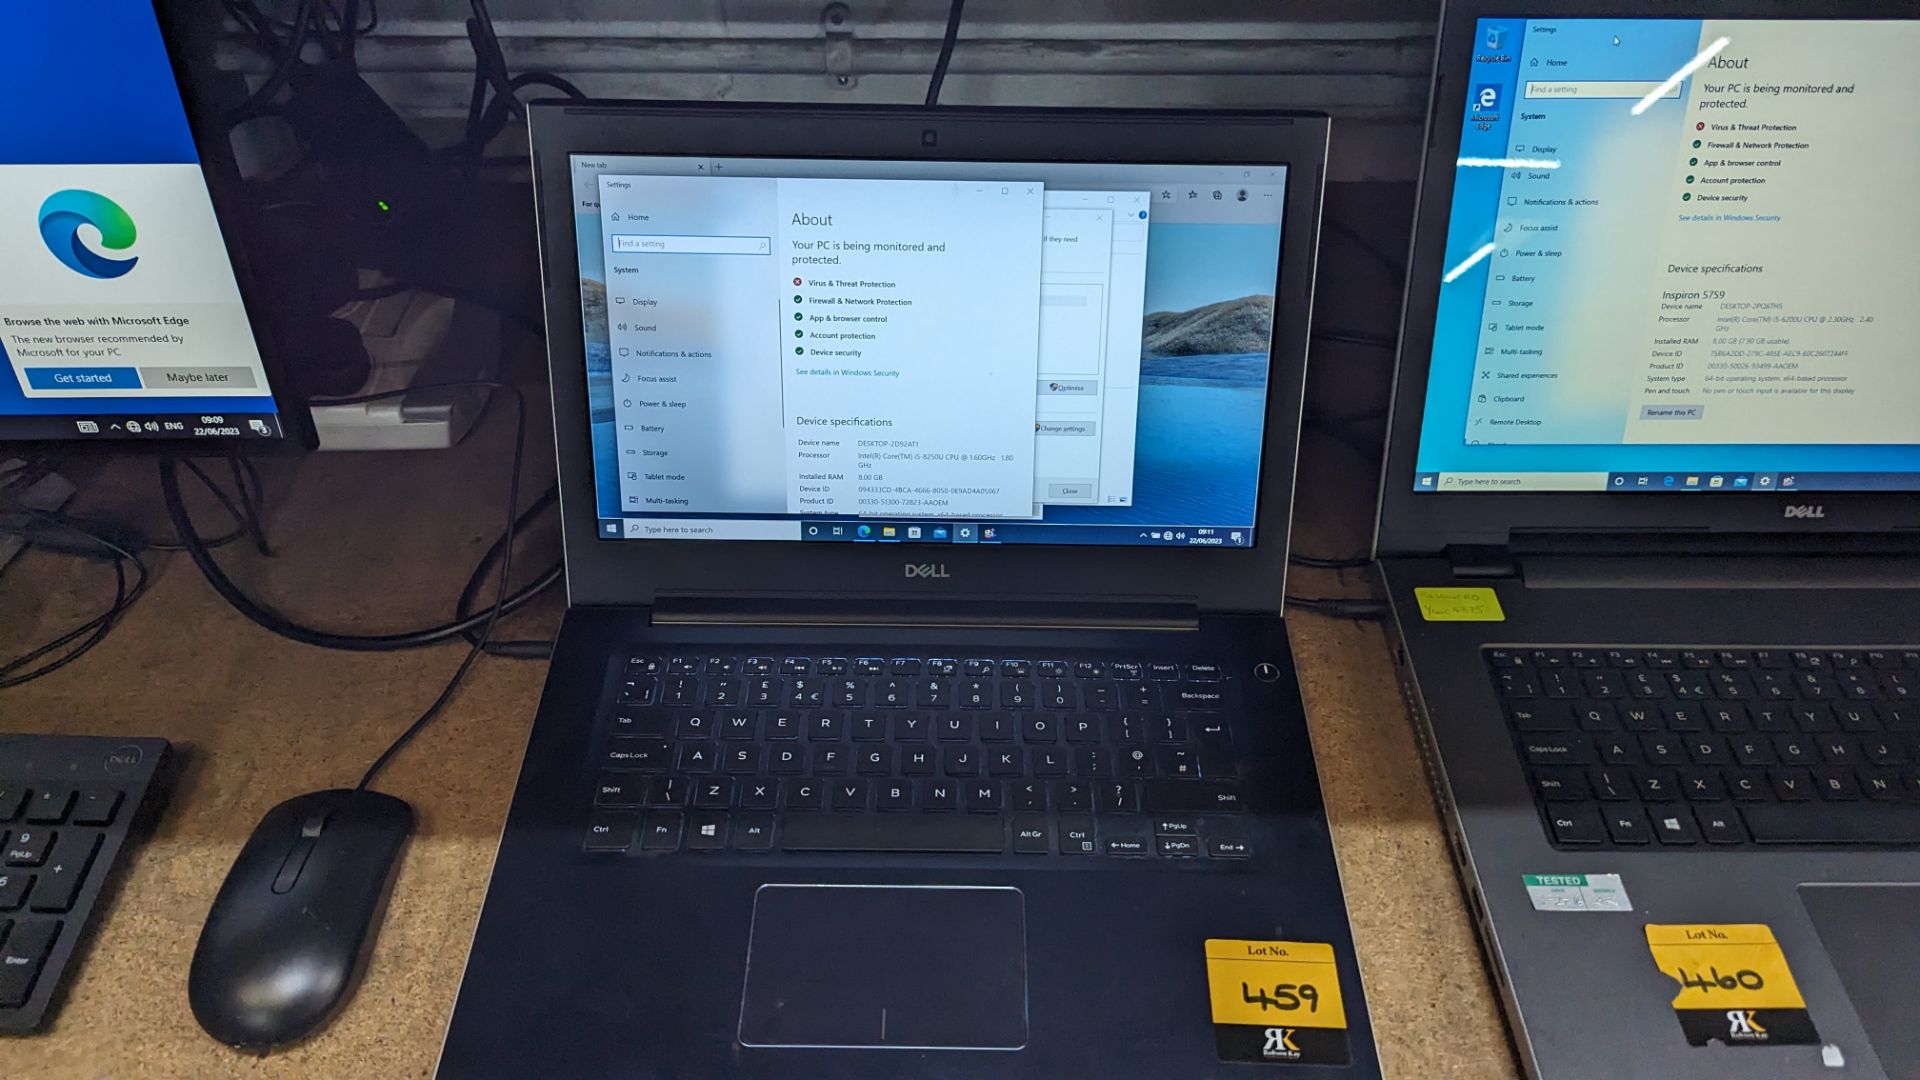 Dell Vostro notebook computer with Intel Core i5-8250 CPU, 8GB RAM, 256GB SSD including power pack/c - Image 3 of 17